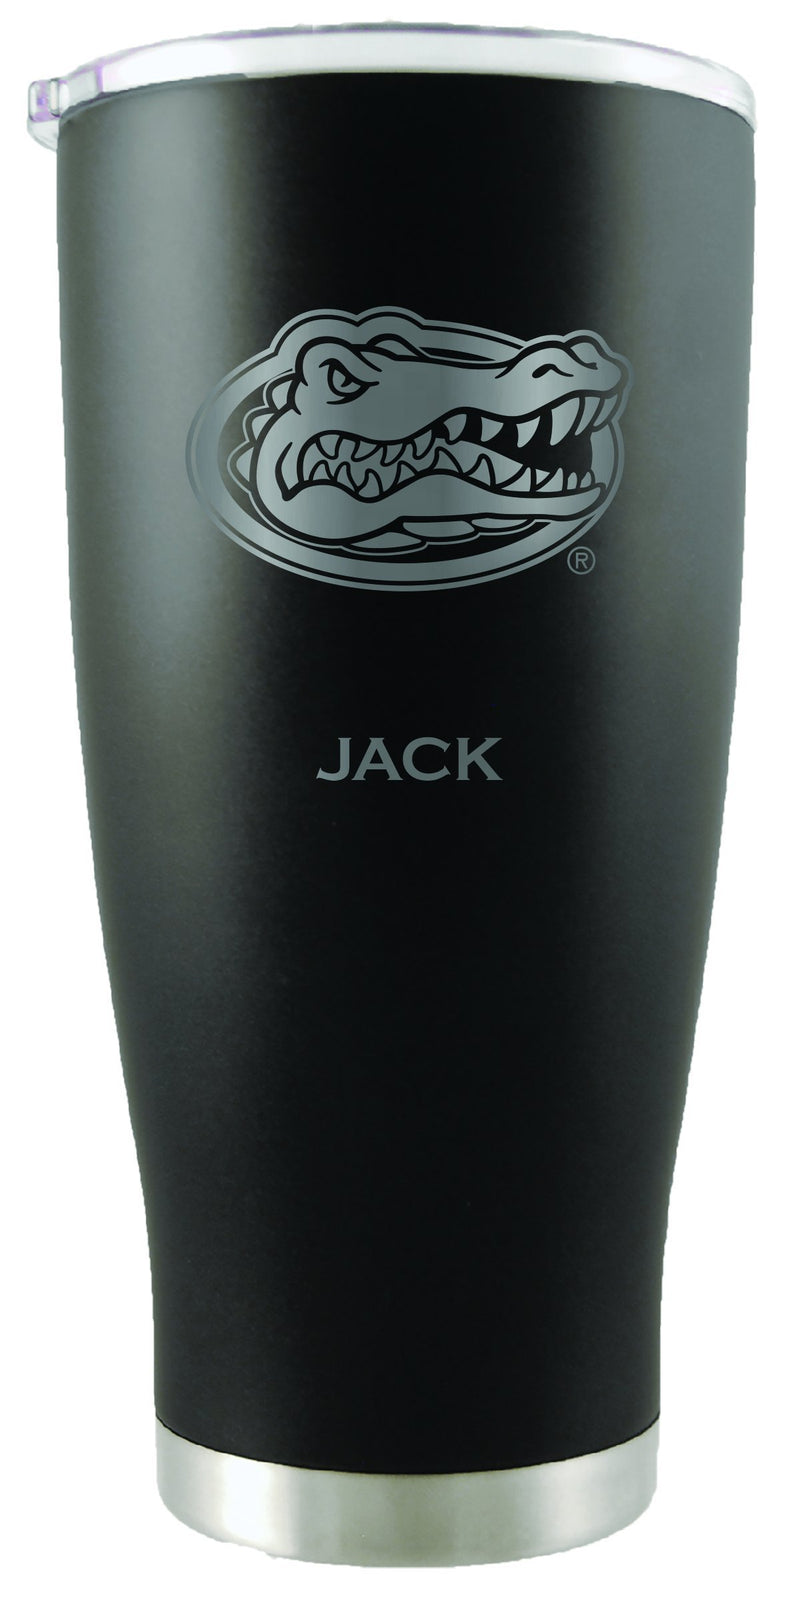 20oz Black Personalized Stainless Steel Tumbler | Florida
COL, CurrentProduct, Drinkware_category_All, FL, Florida Gators, Personalized_Personalized
The Memory Company